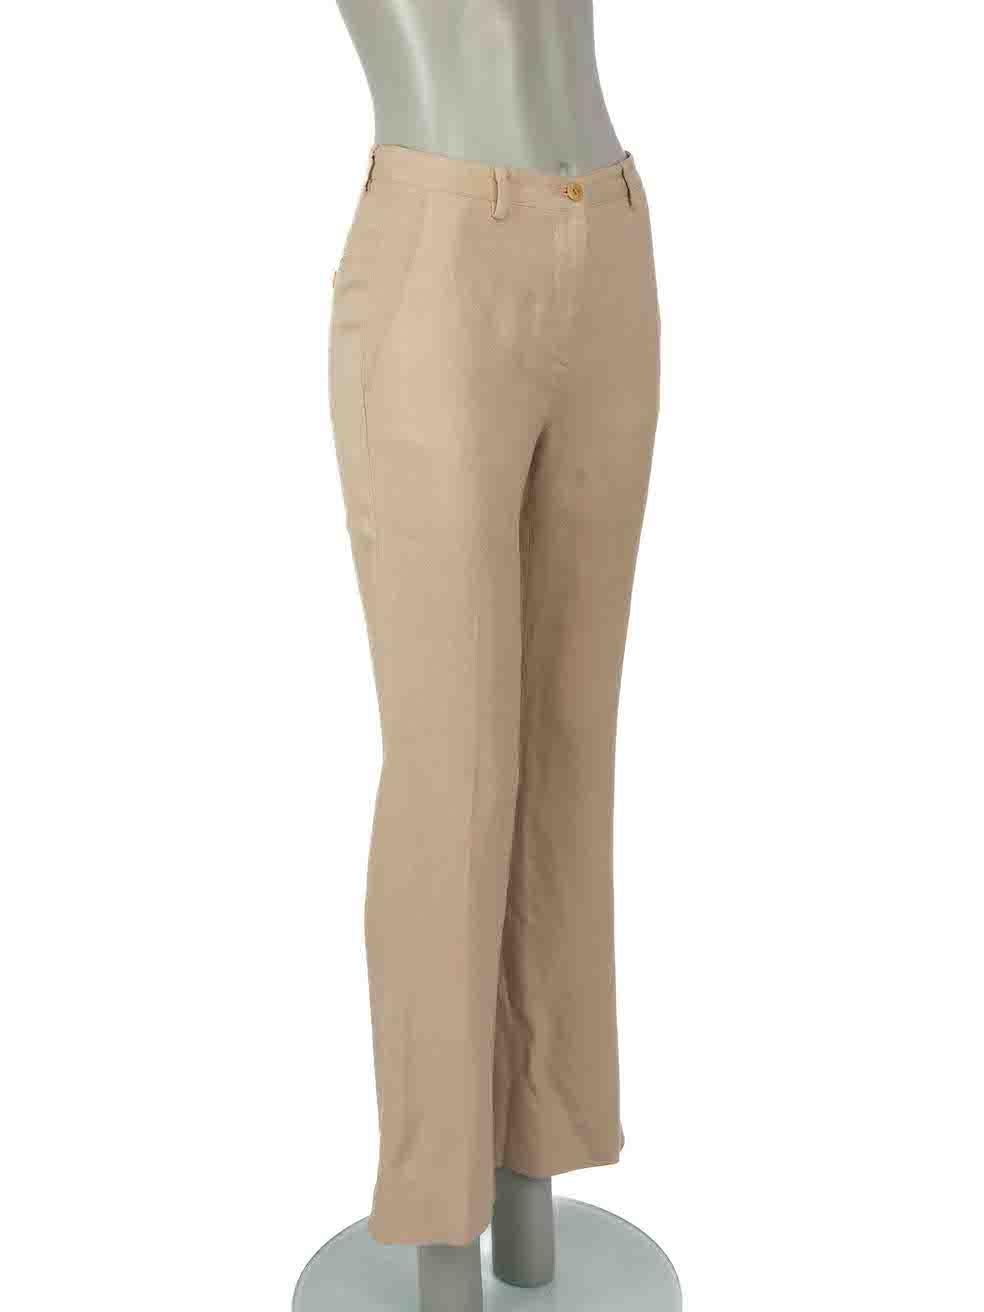 CONDITION is Very good. Minimal wear to trousers is evident. Minimal discolouration to rear right hip and a scuff mark to the rear left hemline on this used Miu Miu designer resale item.

Details
Beige
Viscose
Straight leg trousers
Mid rise
Front